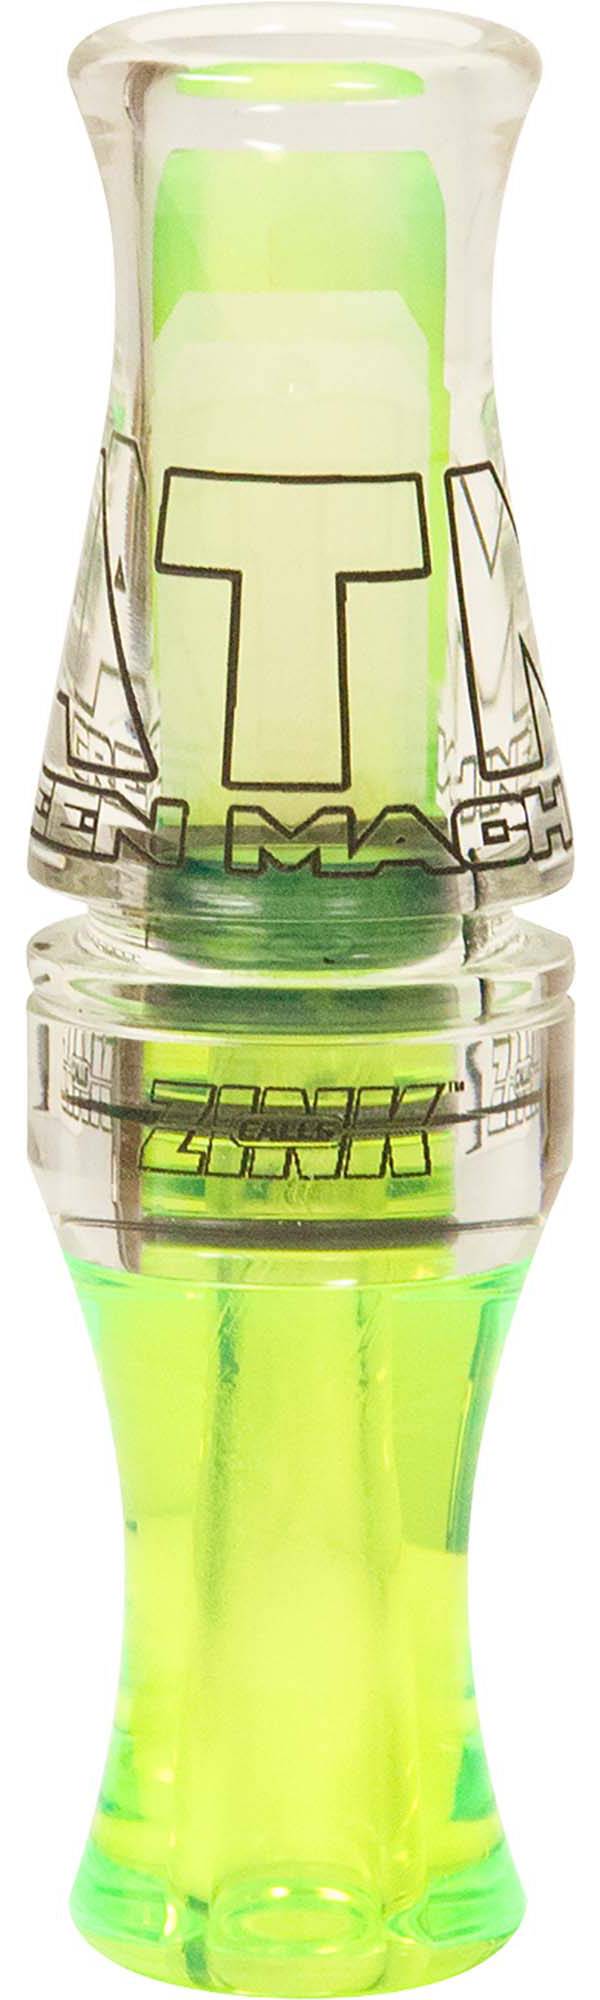 Zink ATM Polycarbonate Duck Call product image